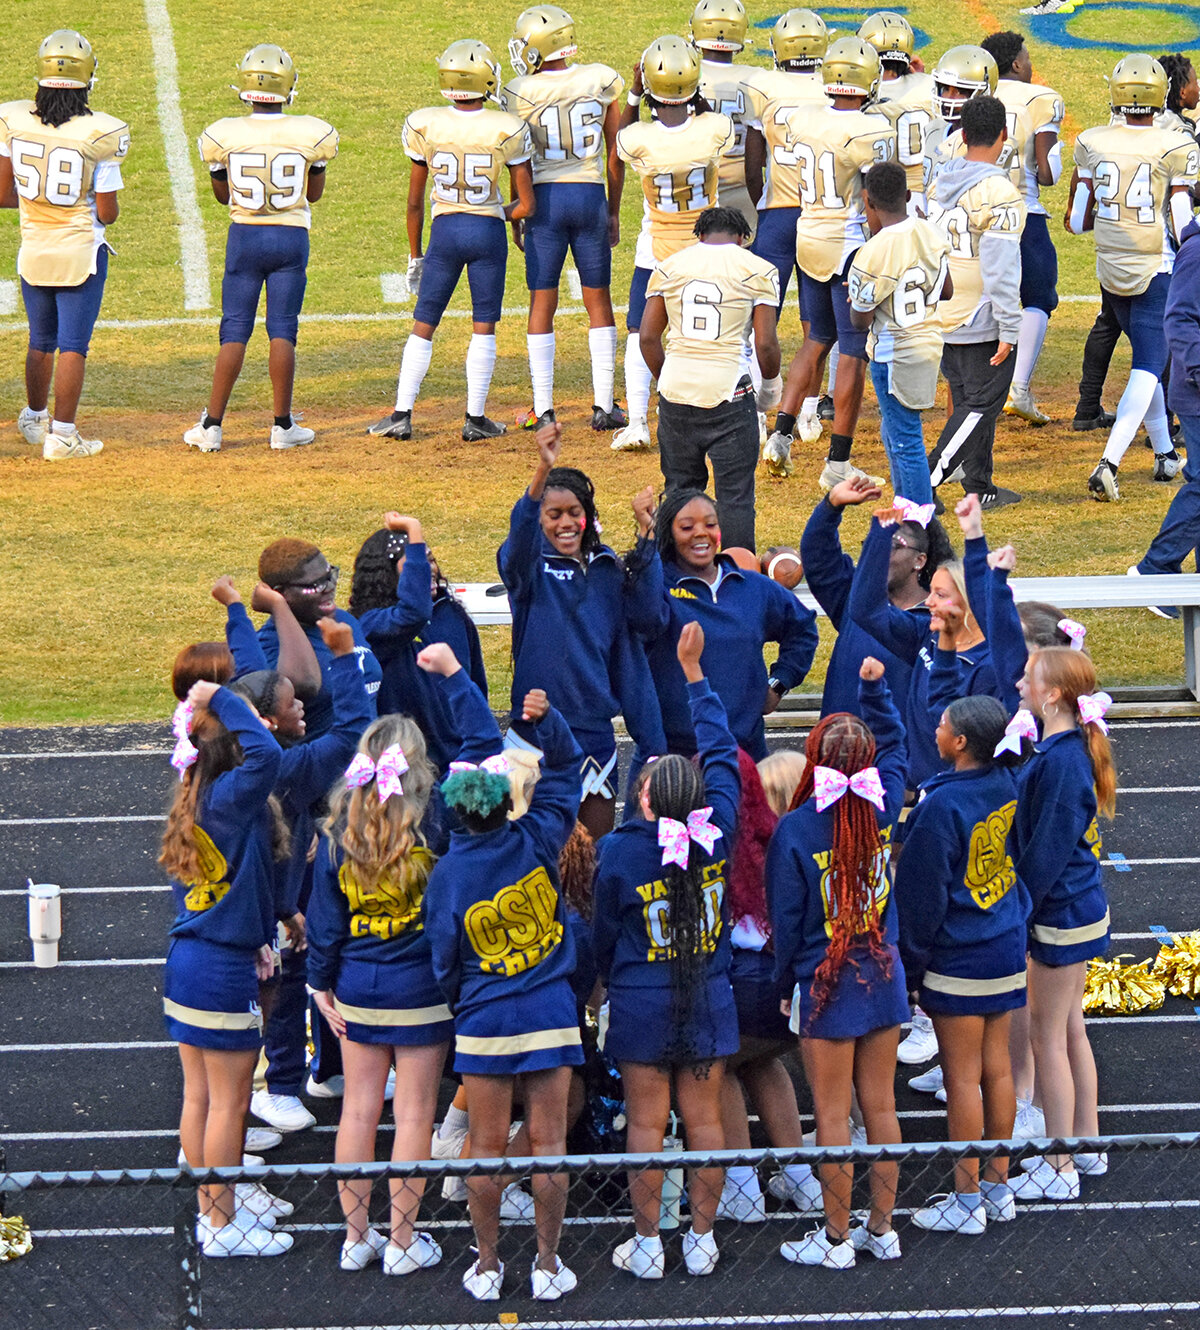 The Vikings varsity cheerleaders got themselves pumped up for the game.